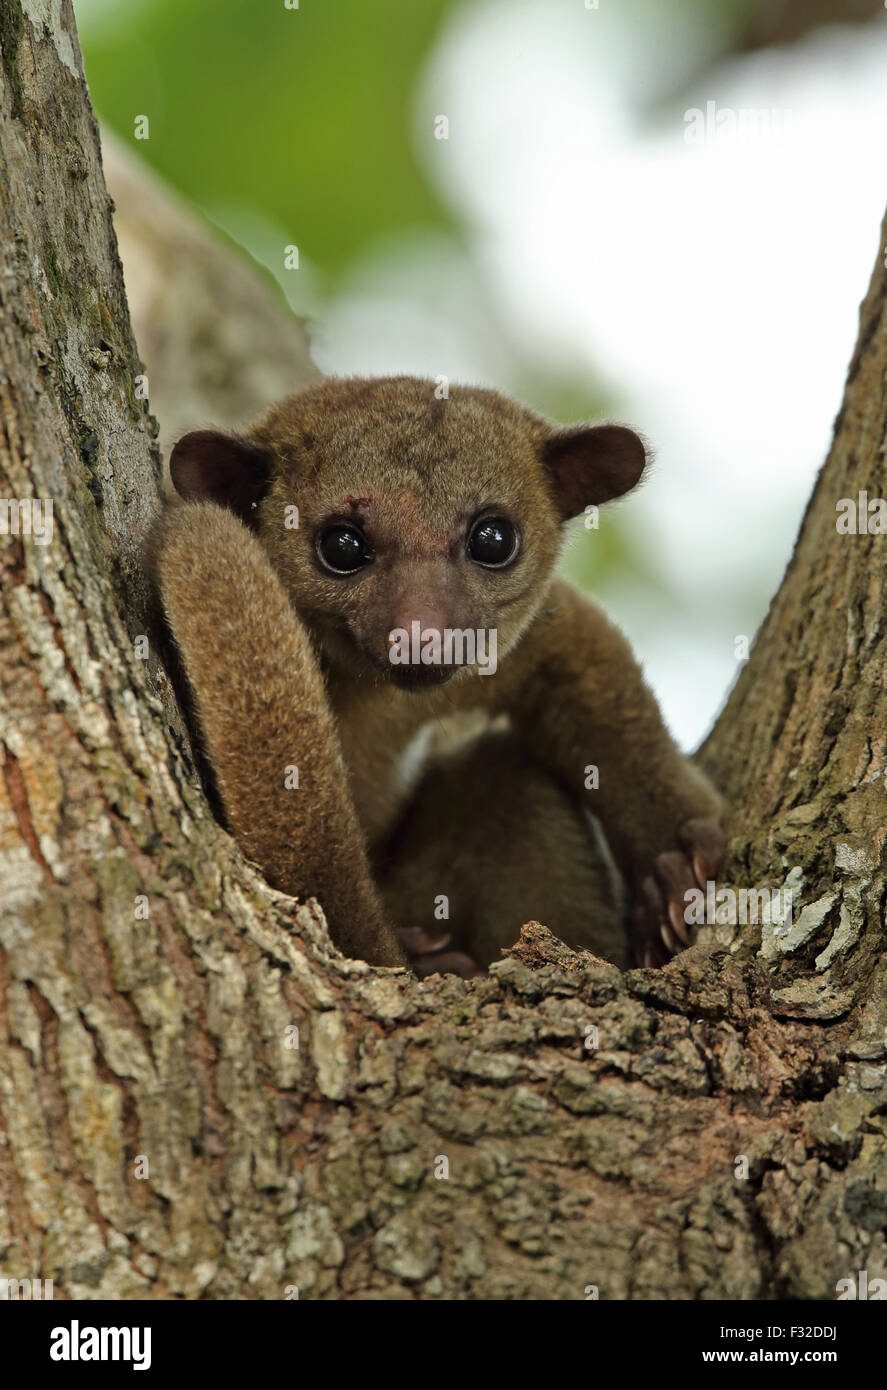 Kinkajou (Potos flavus megalotus) adult, with wounds to face from fighting, sitting in crook of tree, Darien, Panama, April Stock Photo